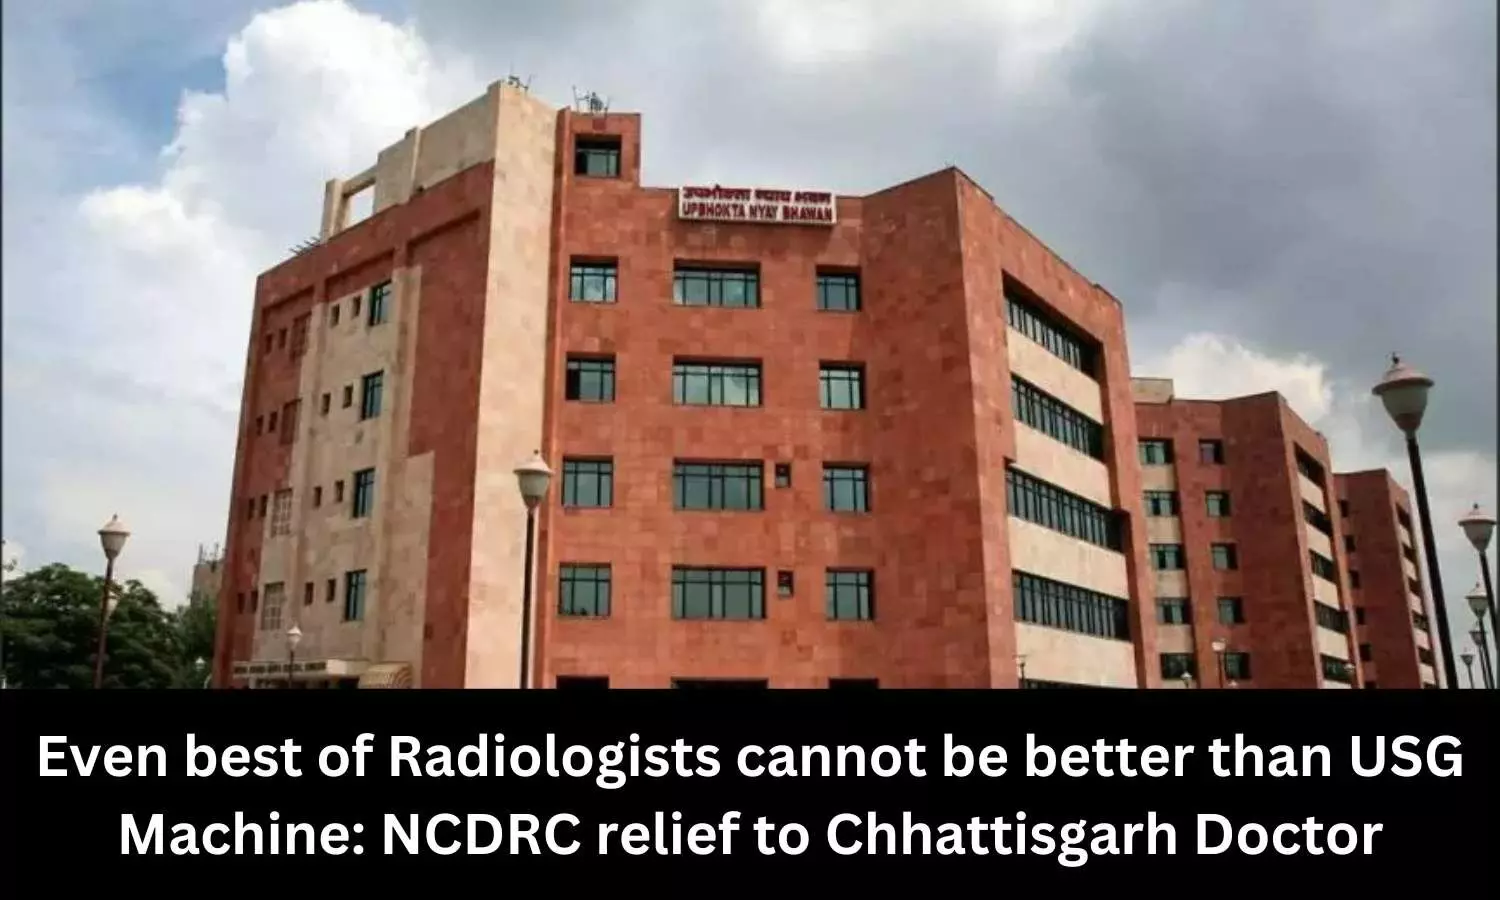 Even best of Radiologists cannot be better than USG Machine: NCDRC relief to Chhattisgarh Doctor